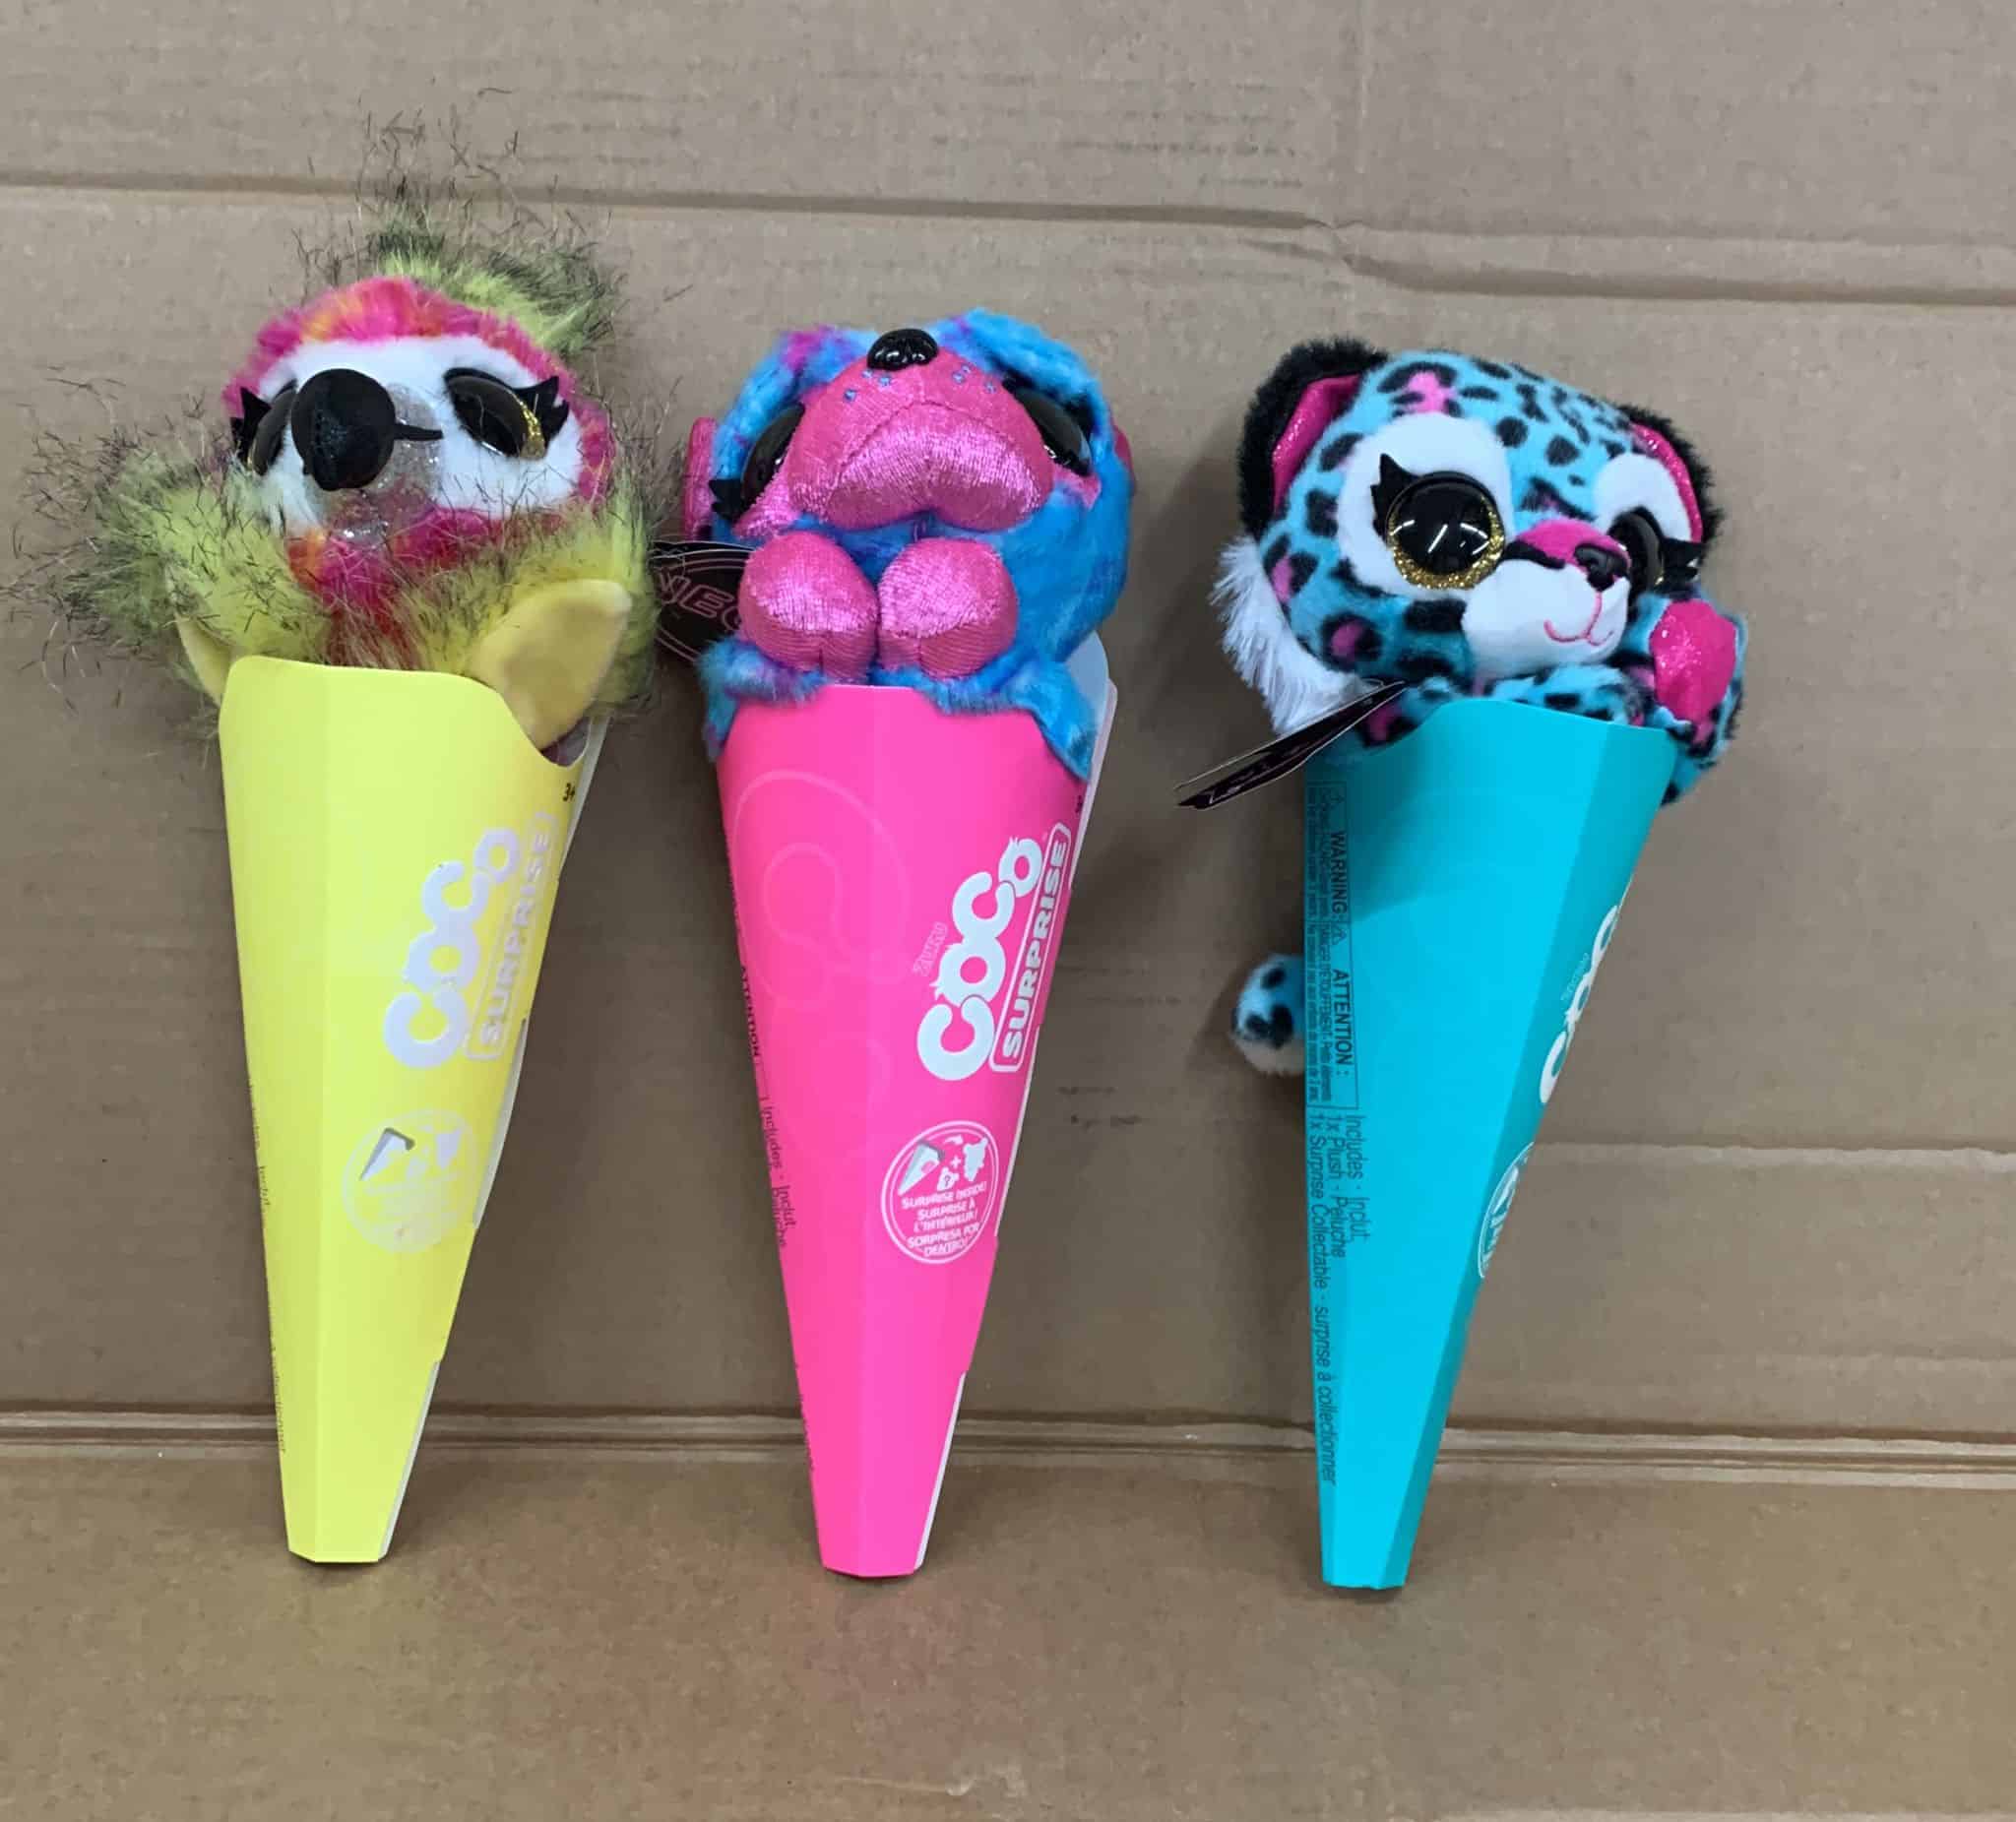 Coco Surprise Neon by ZURU Randomly Assorted Animal Plush Toys with Baby Collectible Pencil Topper Character Toy in Cone Mystery-3103